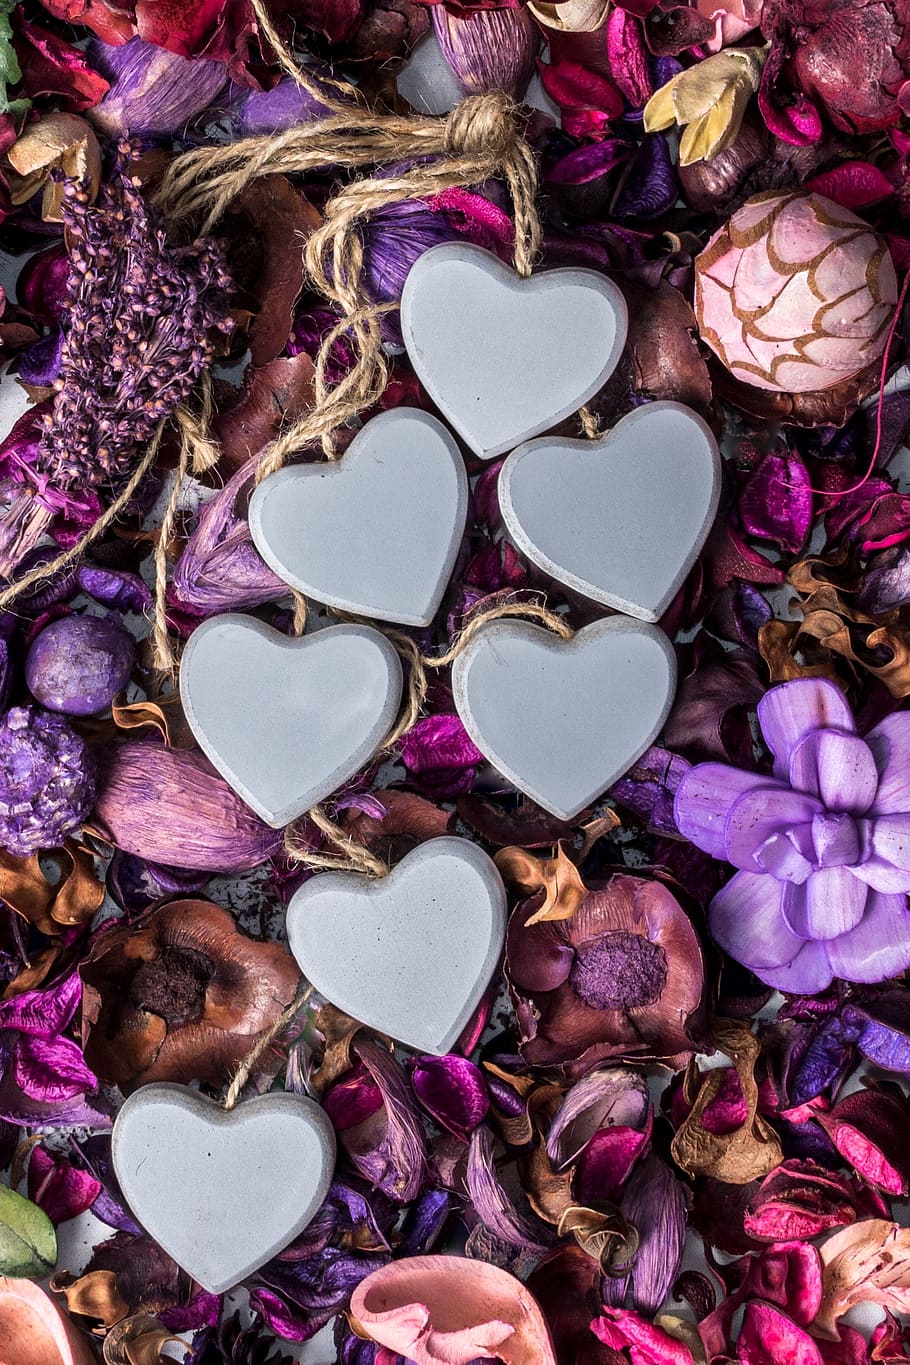 seven, gray, heart decors, valentine's day, heart, flowers, lavender, love, nature, hearts